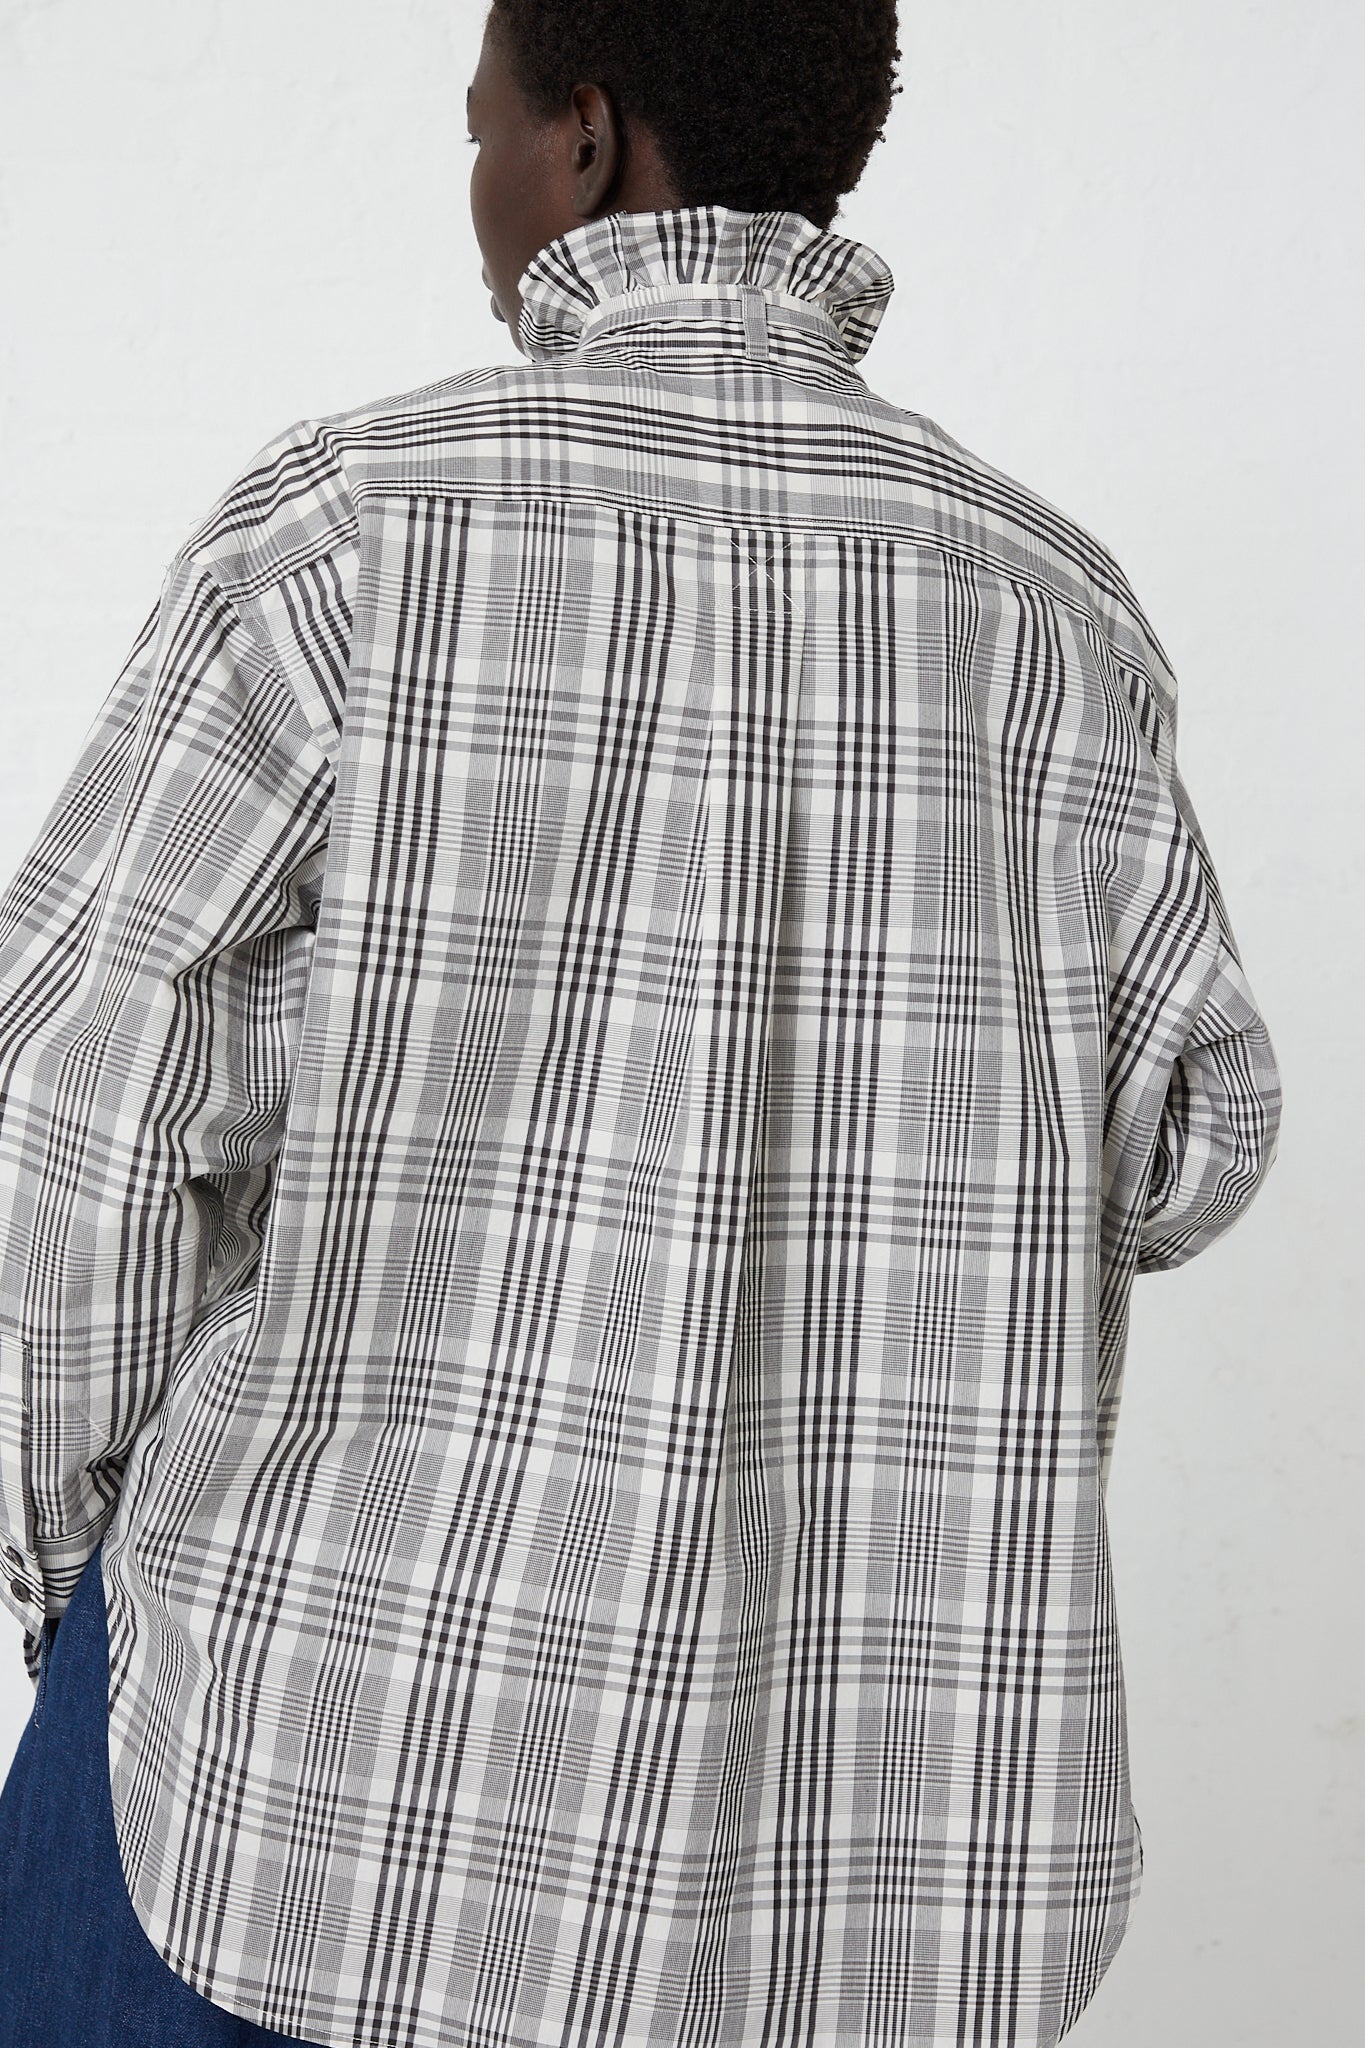 The back view of a woman wearing a KasMaria Poplin Tie Shirt with Ruffle Collar in Heavy Plaid.